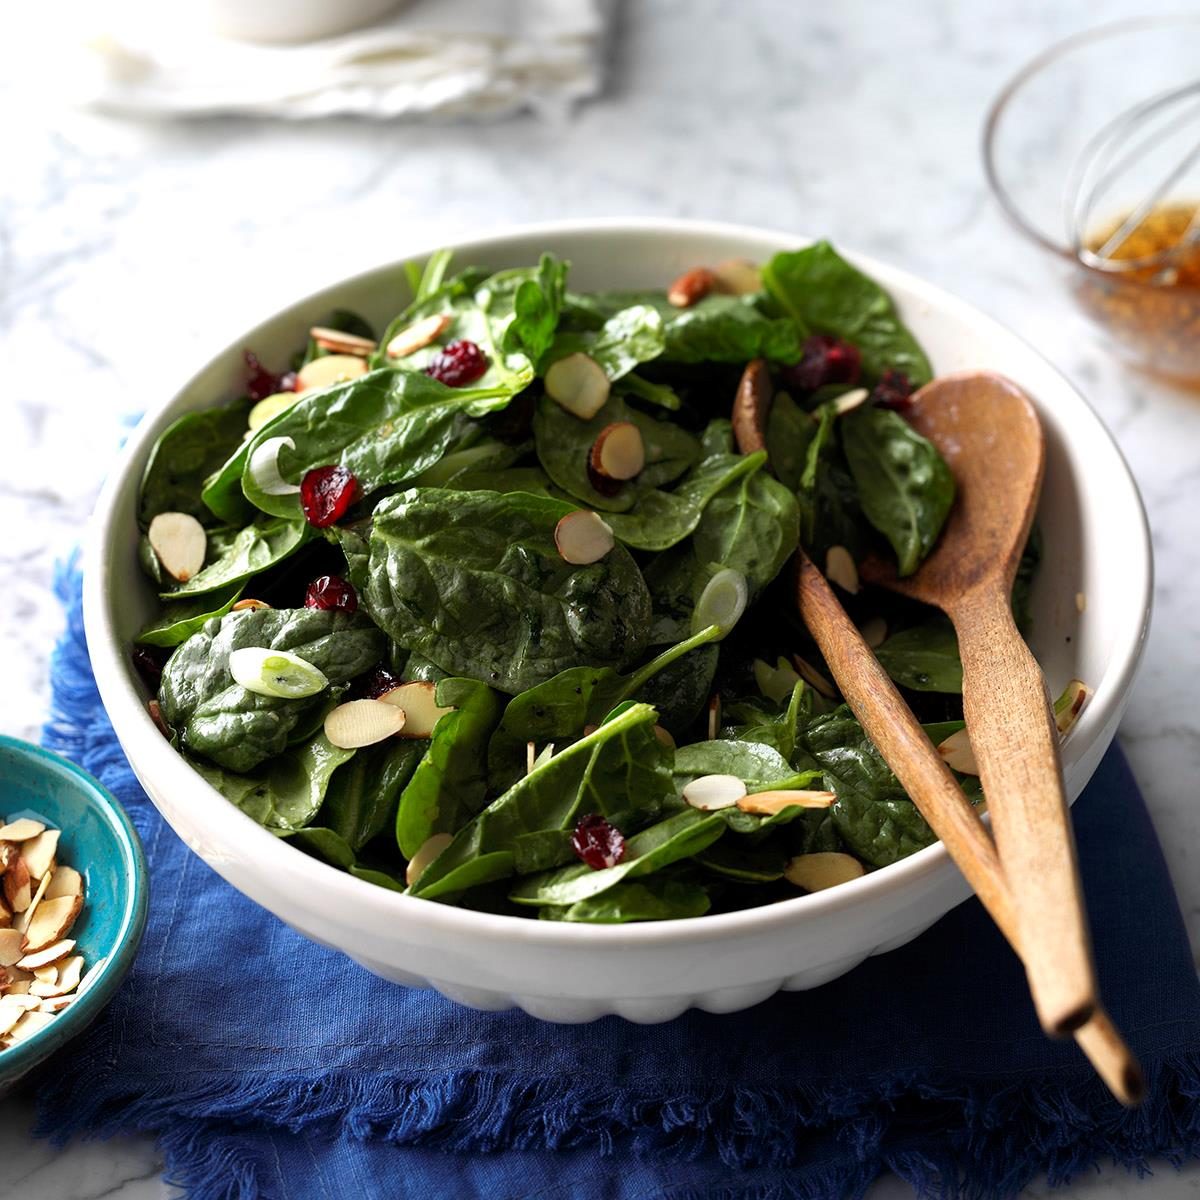 Cranberry Almond Spinach Salad Recipe: How to Make It